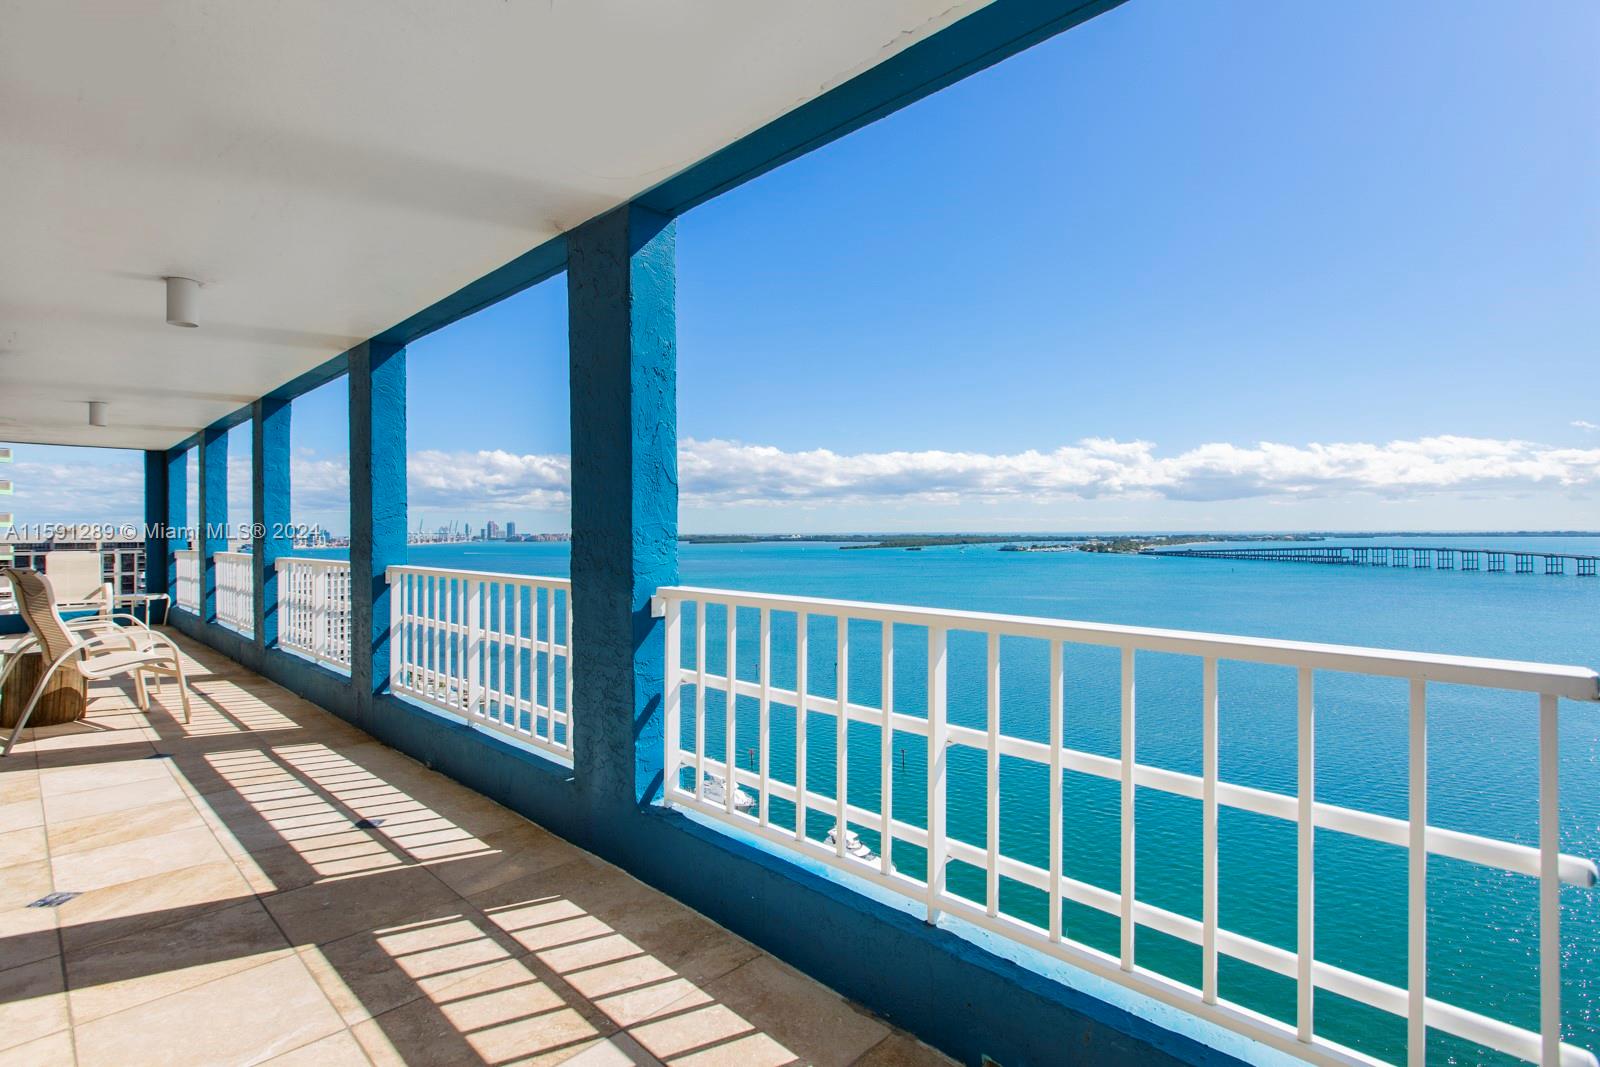 Discover this unique waterfront three-bedroom, two-and-a-half-bathroom apartment in the coveted Blue section of the Imperial on Brickell. This apartment boasts the largest wrap-around balcony of any building on Brickell, offering stunning views of Biscayne Bay from every room with east, north, and south exposures. One of the bedrooms is equipped with a built-in home office, and the living, dining, master, and third bedrooms feature surround sound speakers. Additional highlights include hurricane shutters, stainless steel appliances in the kitchen, an in-unit washer and dryer, and two parking spaces. The building offers convenient amenities such as a mini-mart with dry cleaning and shoe repair services.